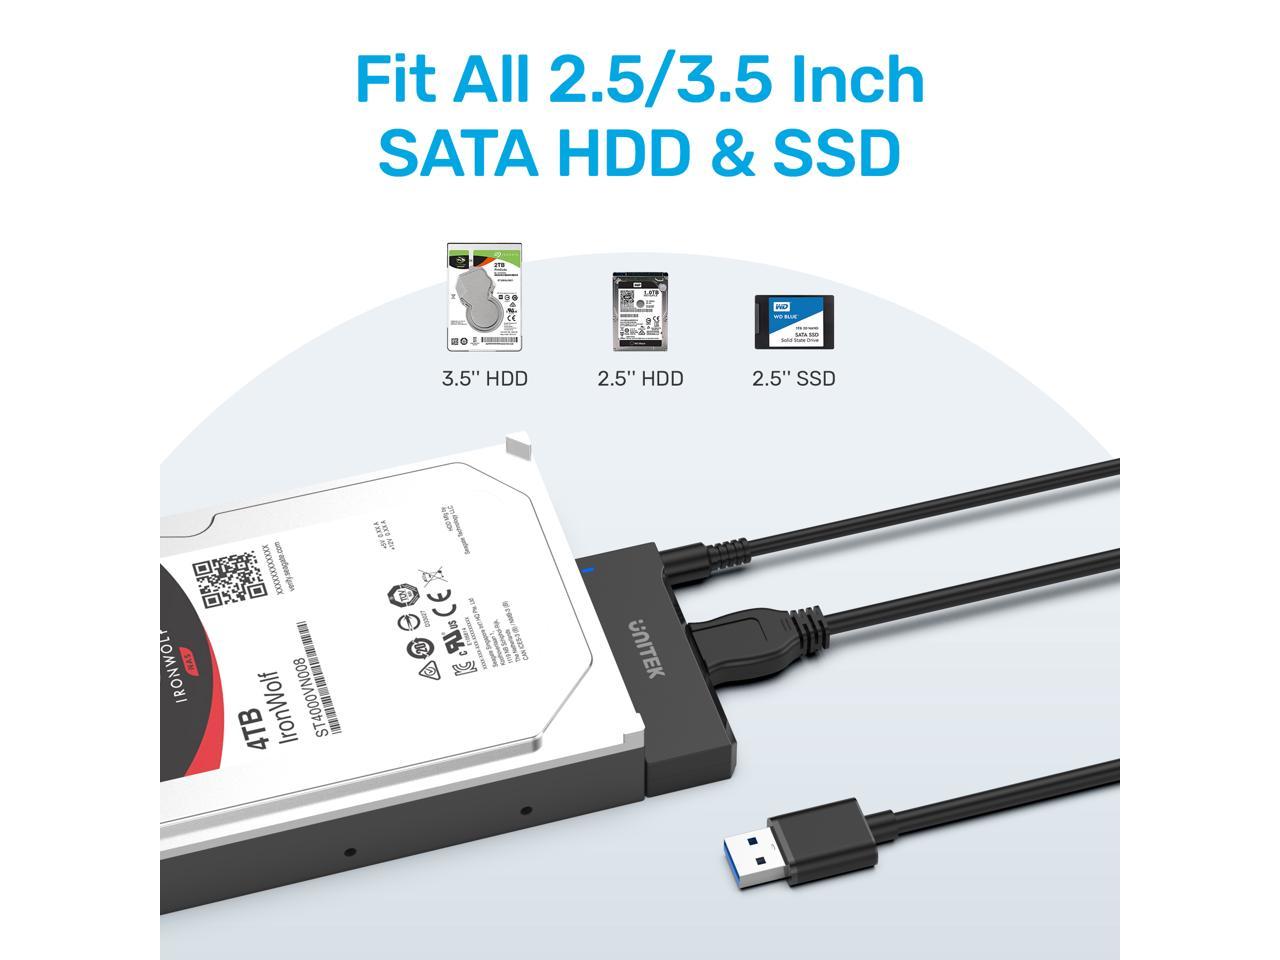 Cable Length: Other Computer Cables 1pc USB 3.0 SATA 3 Cable Sata to USB Adapter Up to 5 Gbps Support 2.5 Inches External SSD HDD Hard Drive Sata III Cable 